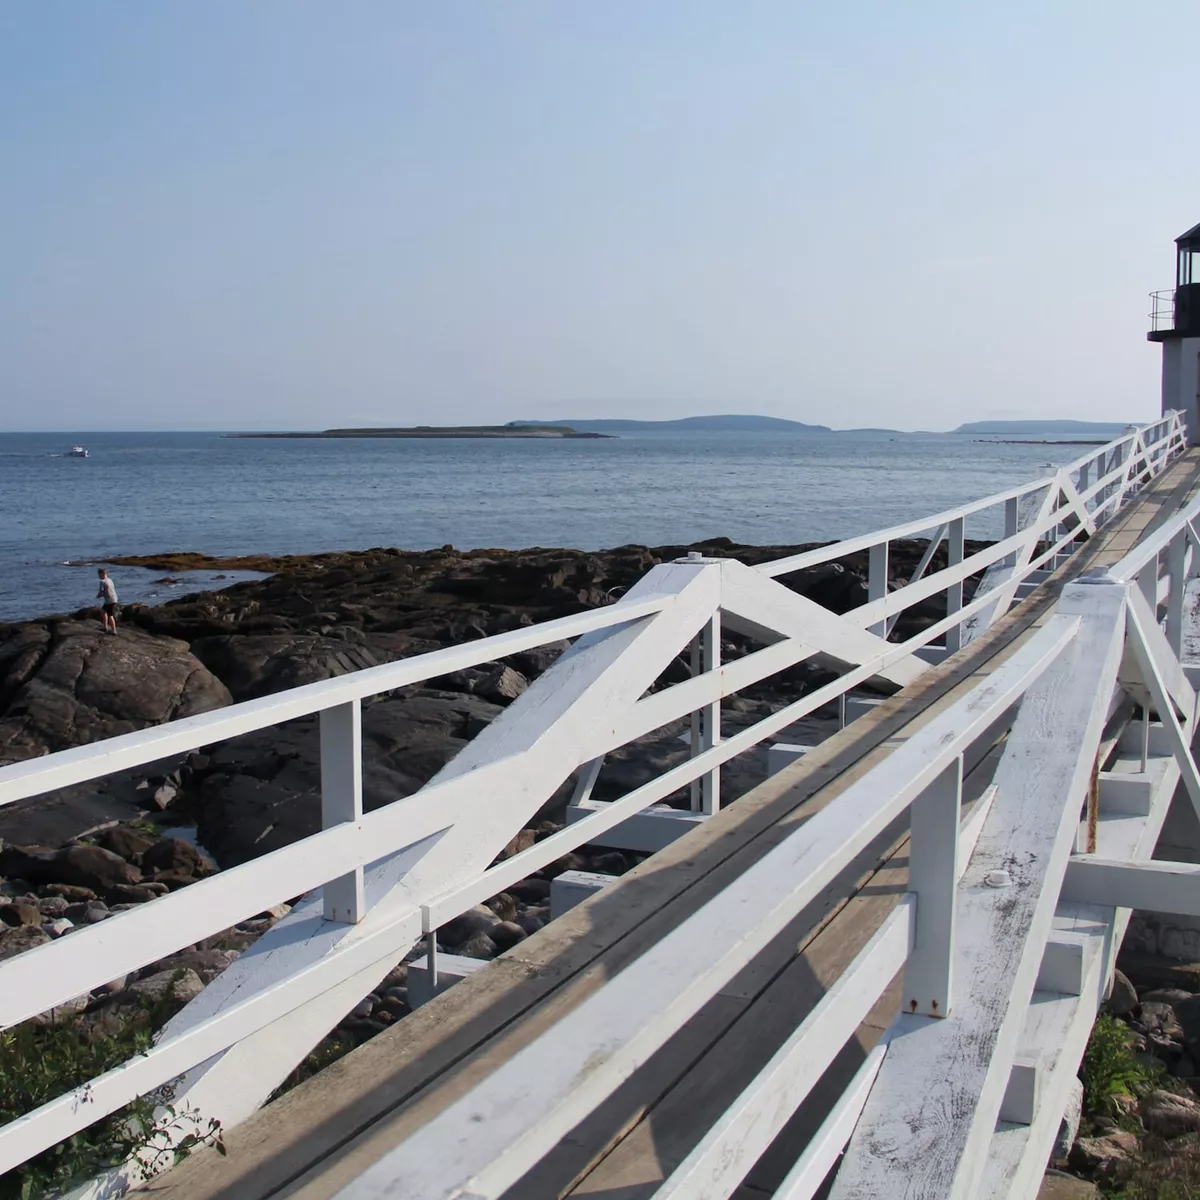 Lighthouses in Maine